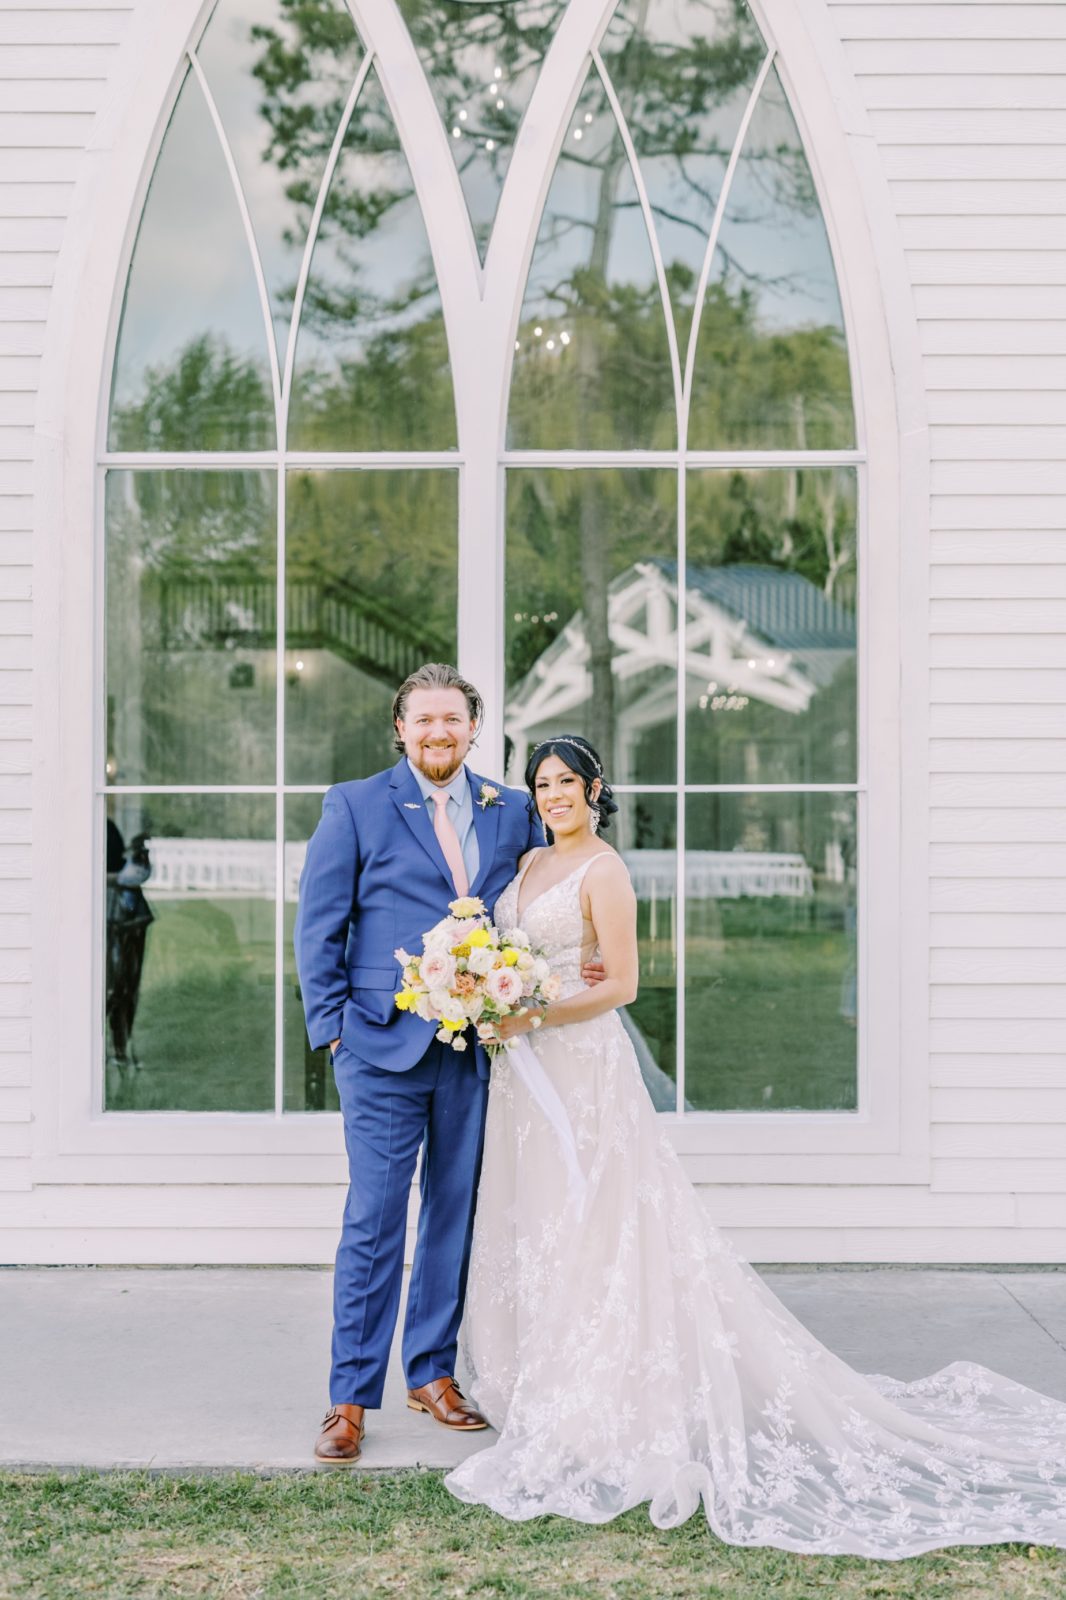 A bride and groom take a portrait in front of a glass window by Christina Elliott Photography in East Houston. bride groom portrait #ChristinaElliottPhotography #ChristinaElliottWeddings #Houstonwedding #TheSpringsVenue #EastHoustonweddings #Mrs #Mr